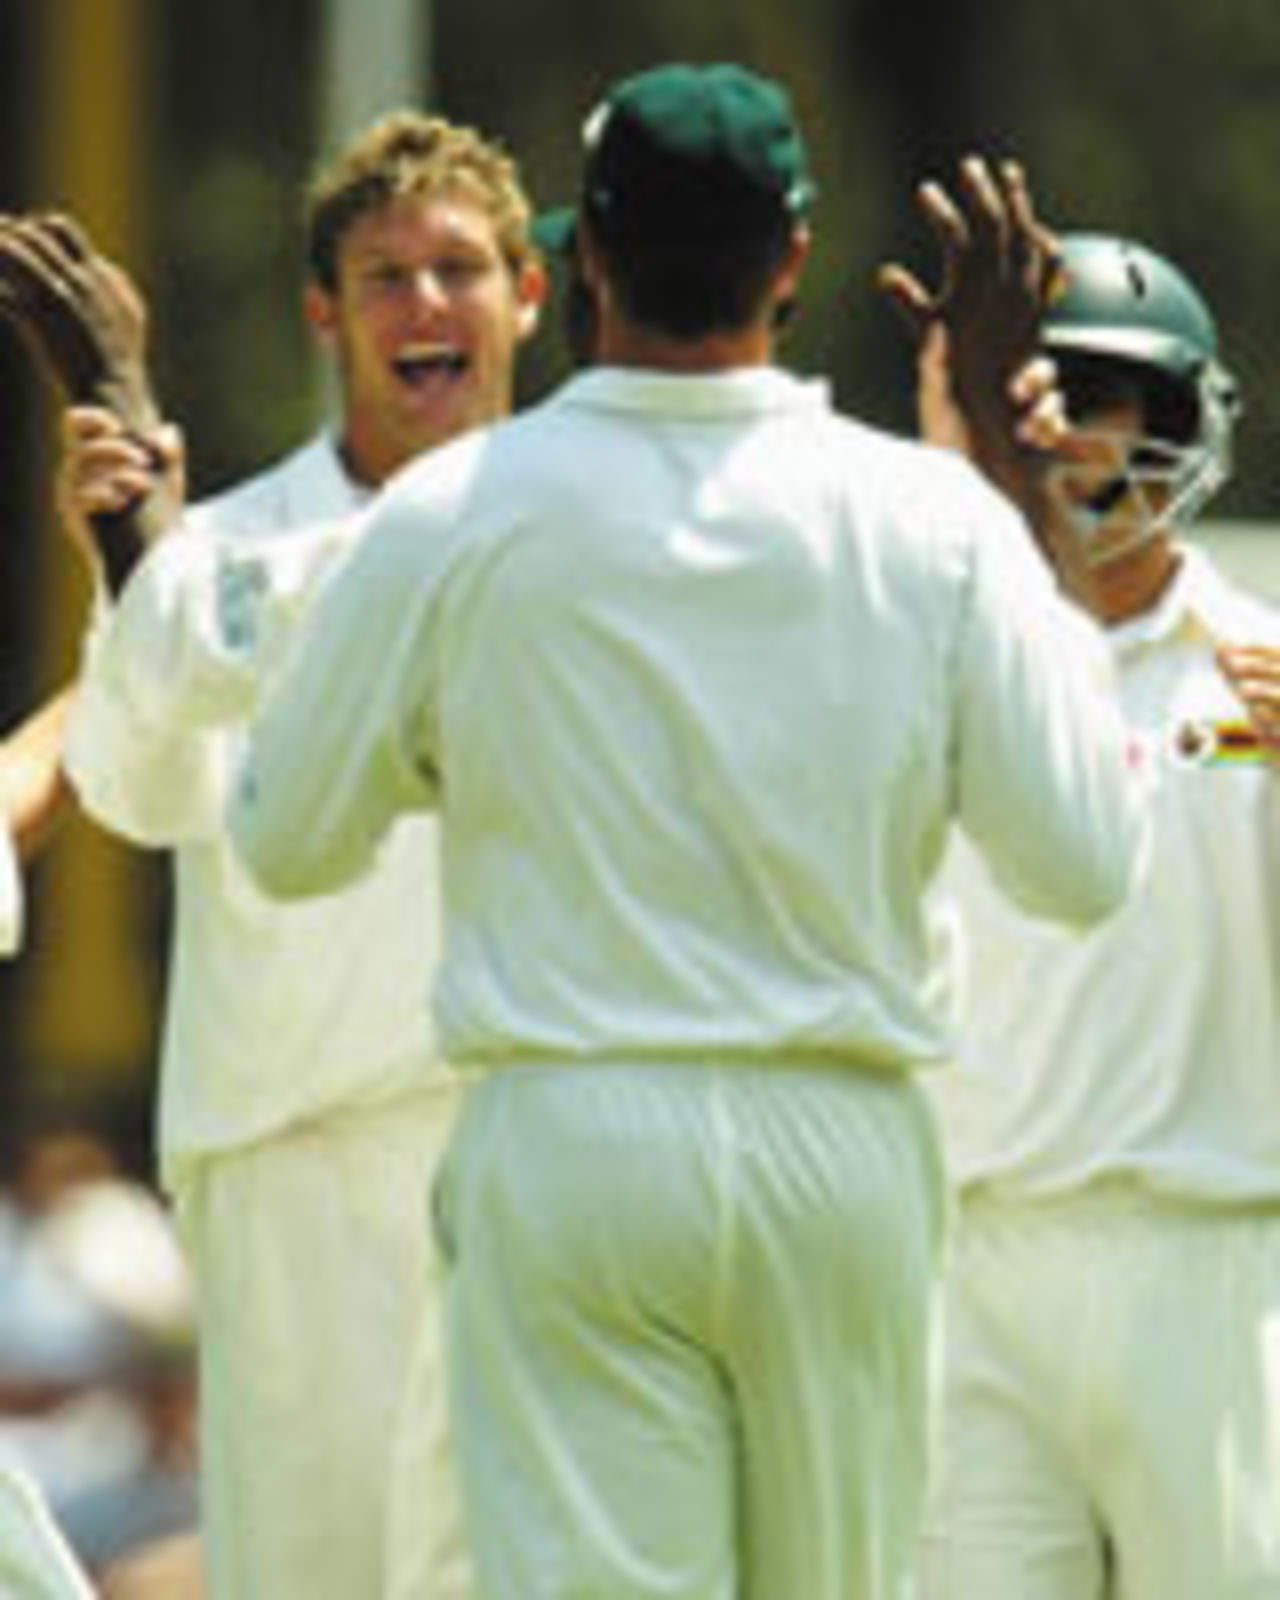 Andy Blignaut celebrates the early wicket of Justin Langer in Australia's first innings, Australia v Zimbabwe, 2nd Test, Sydney, 2nd day